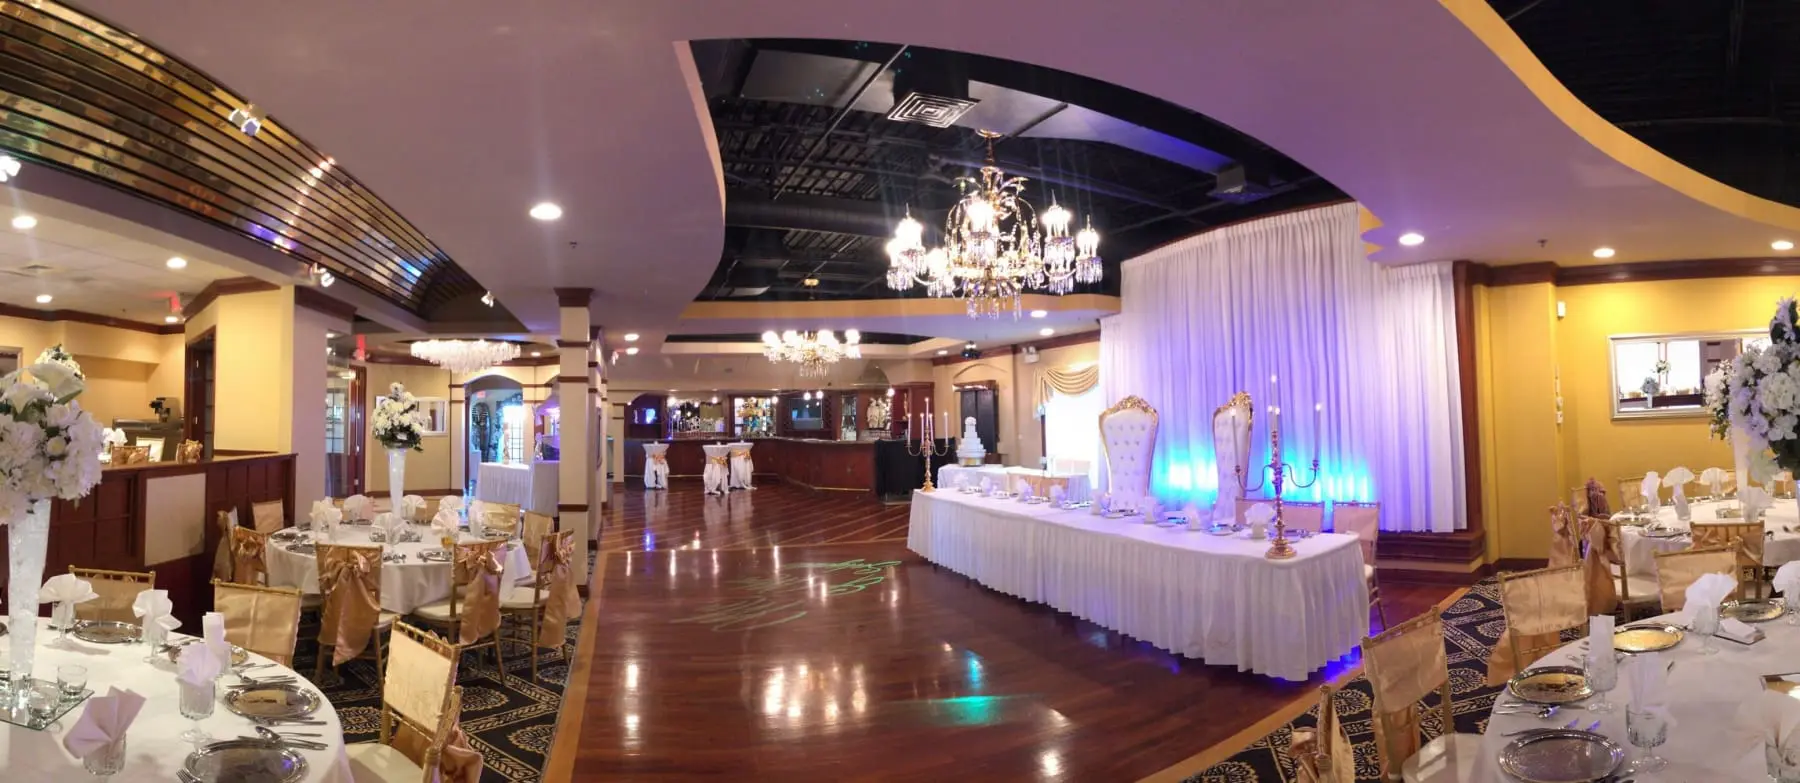 A large room with many tables and lights